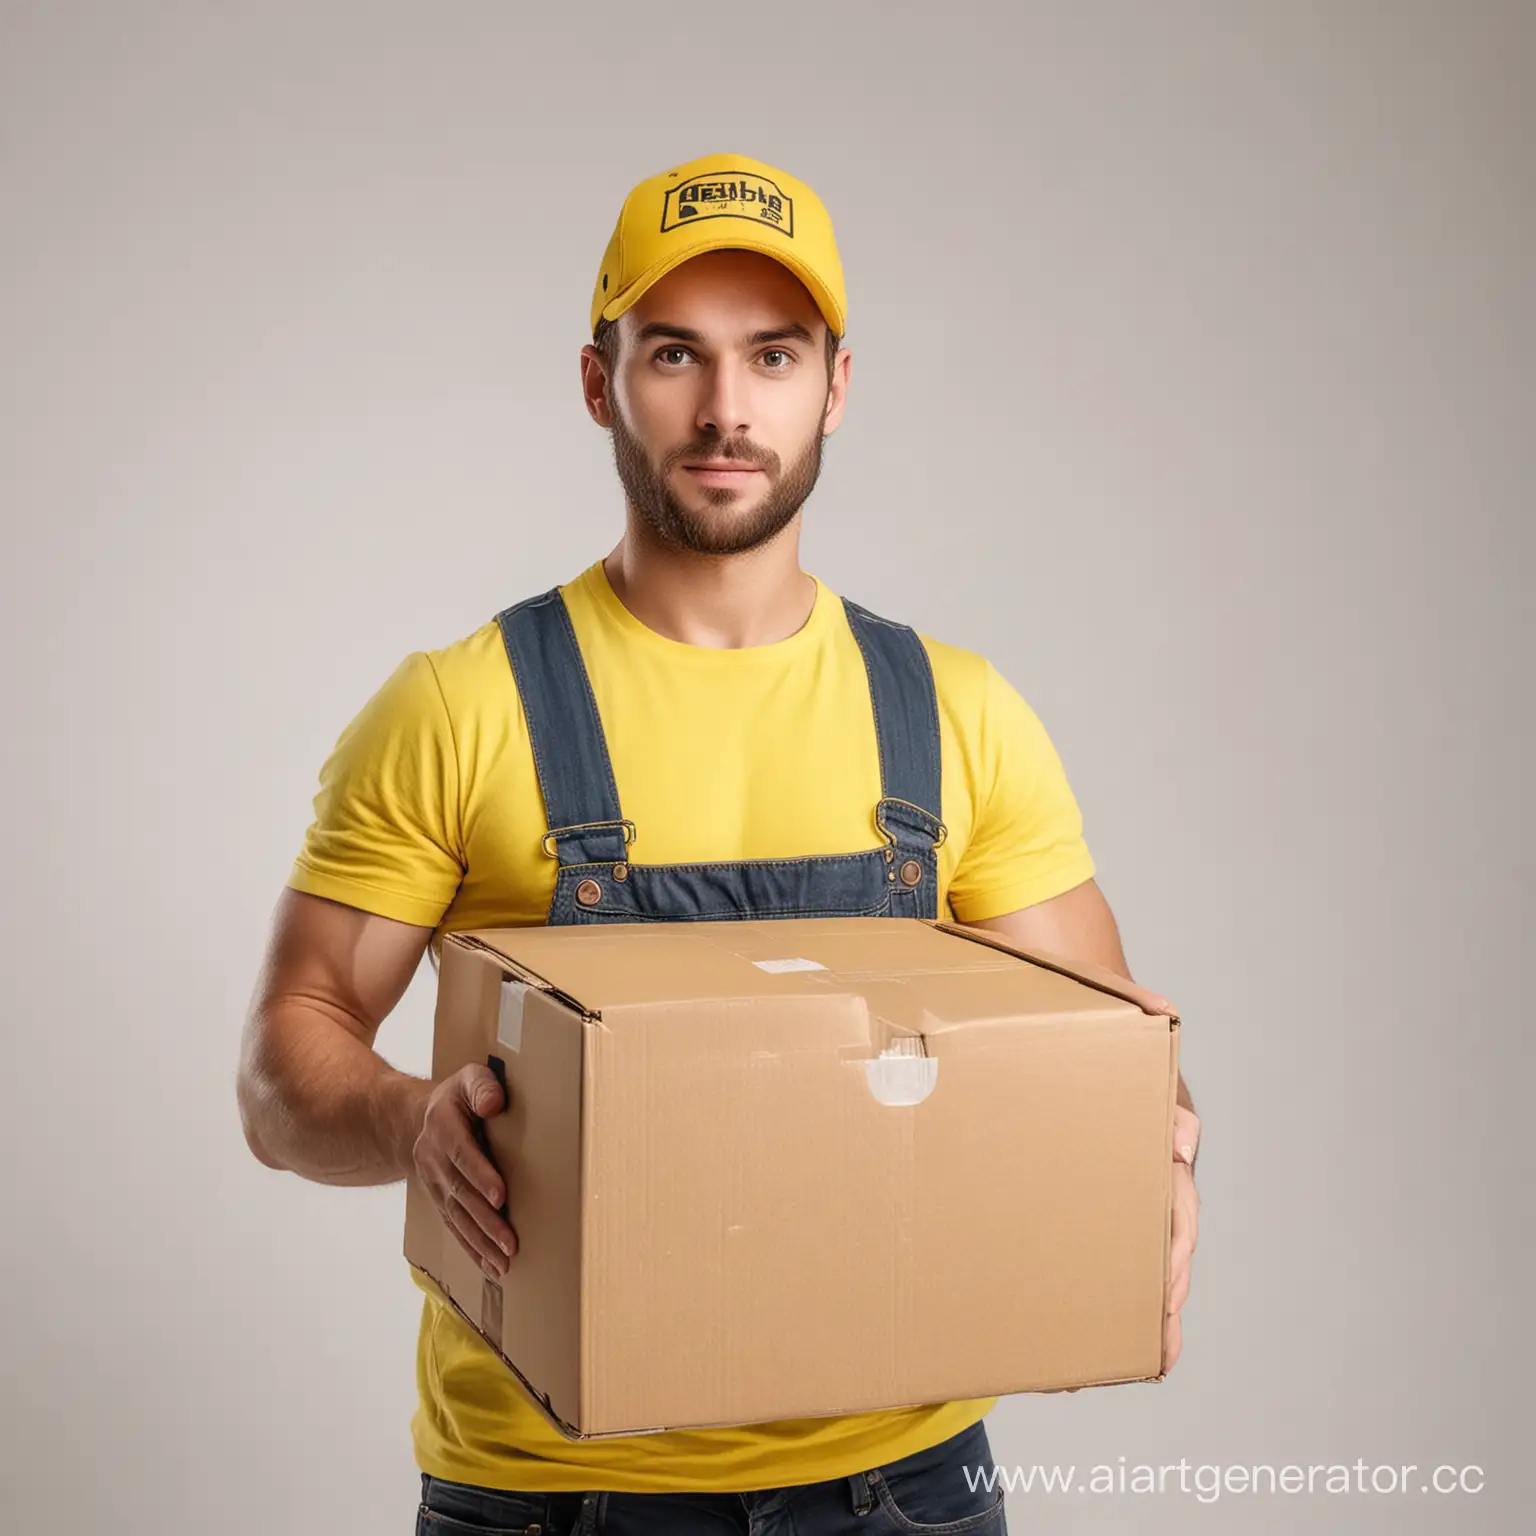 Young-Loader-in-Yellow-Cap-Holding-Box-on-White-Background